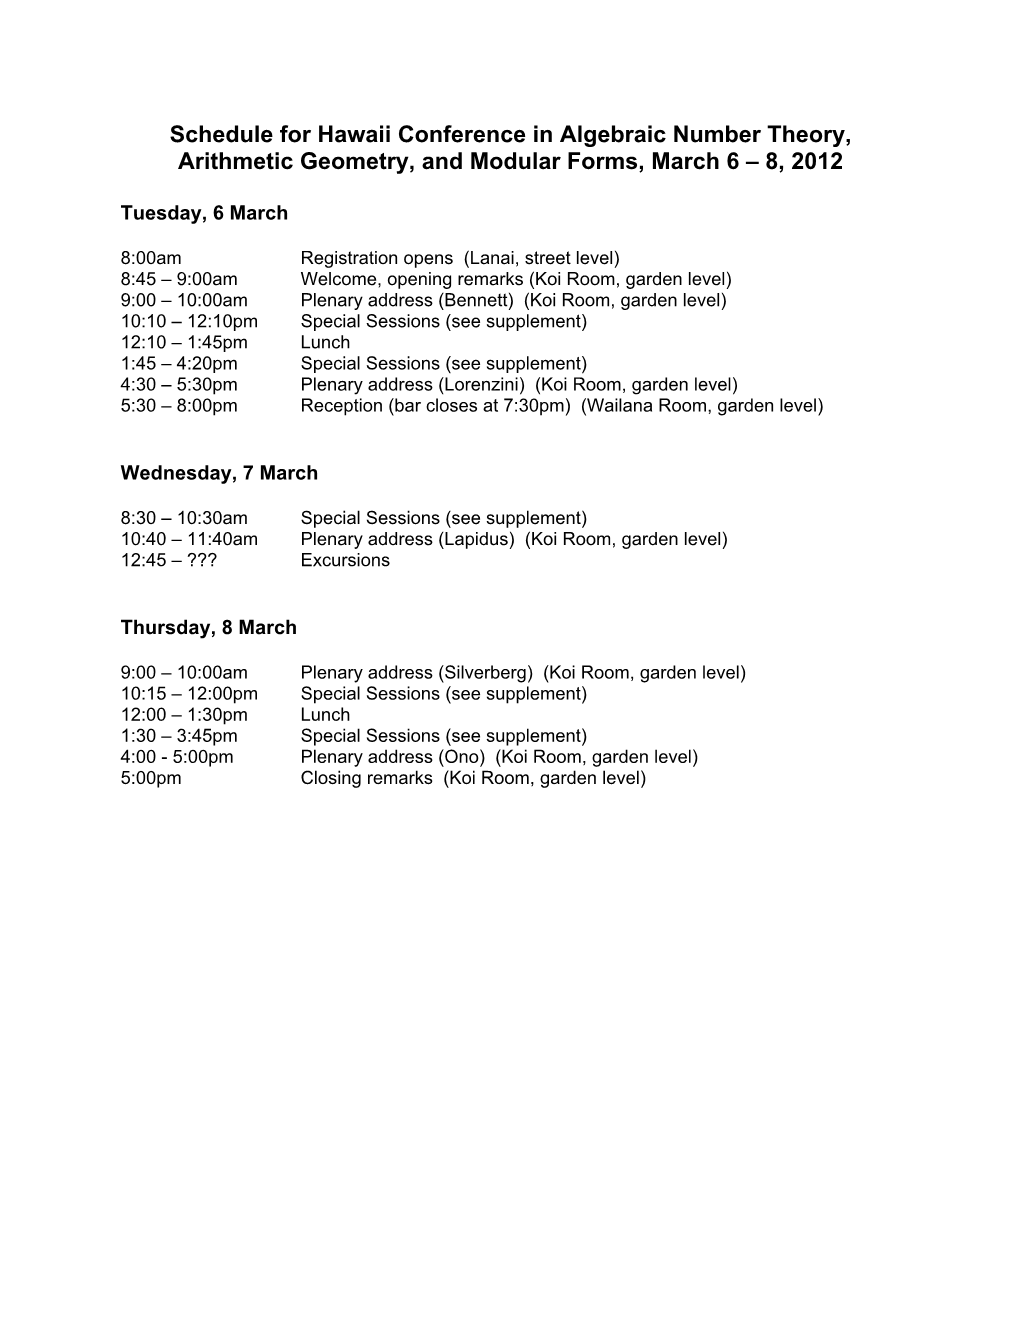 Schedule for Hawaii Conference in Algebraic Number Theory, Arithmetic Geometry, and Modular Forms, March 6 – 8, 2012